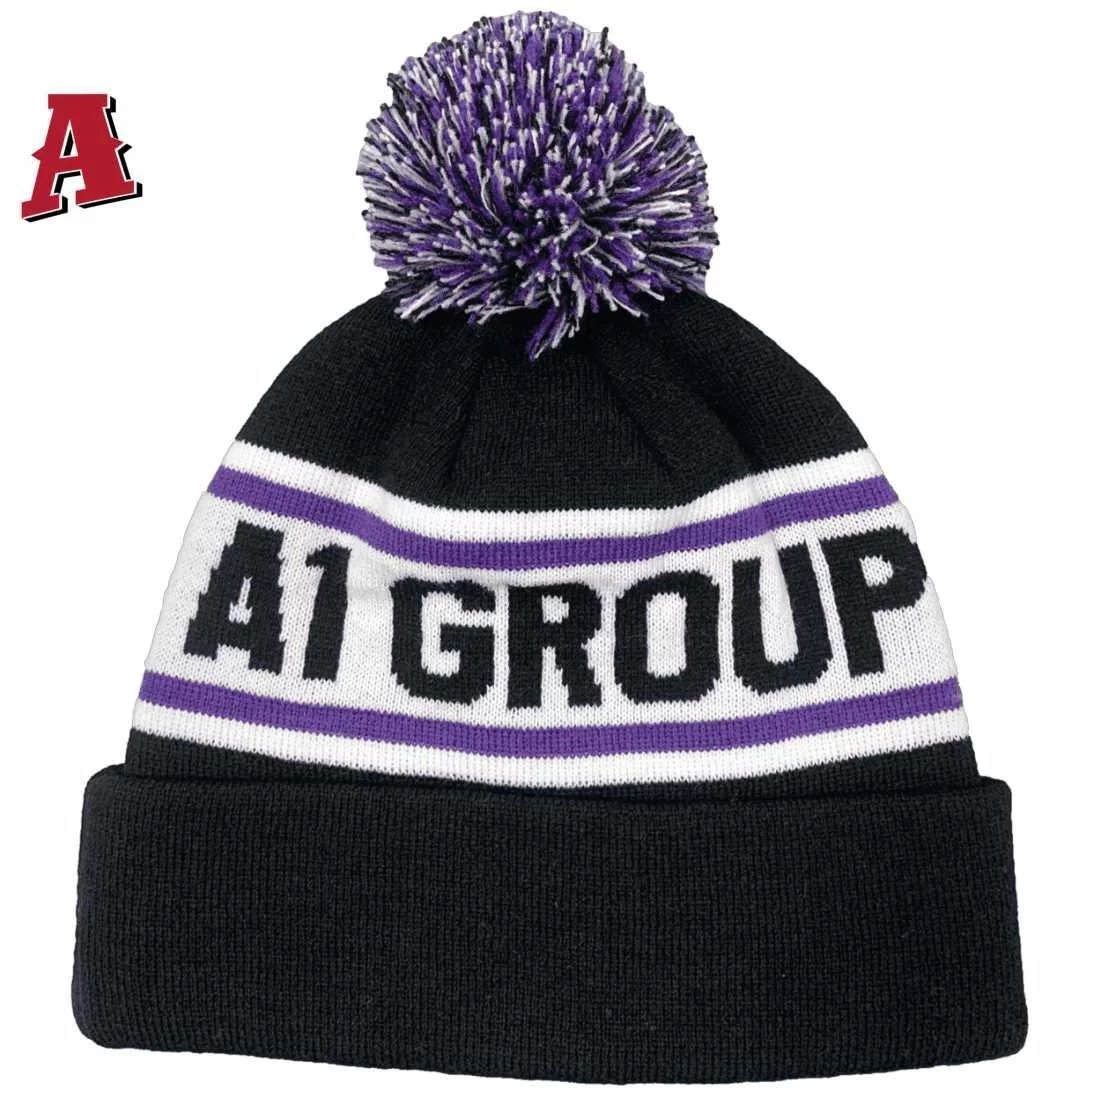 A1 Group Asphalting Pty Ltd Drouin Vic  Aussie Acrylic Custom Beanie with Optional Smooth or Rib Cuff One Size Fits All Black Purple White